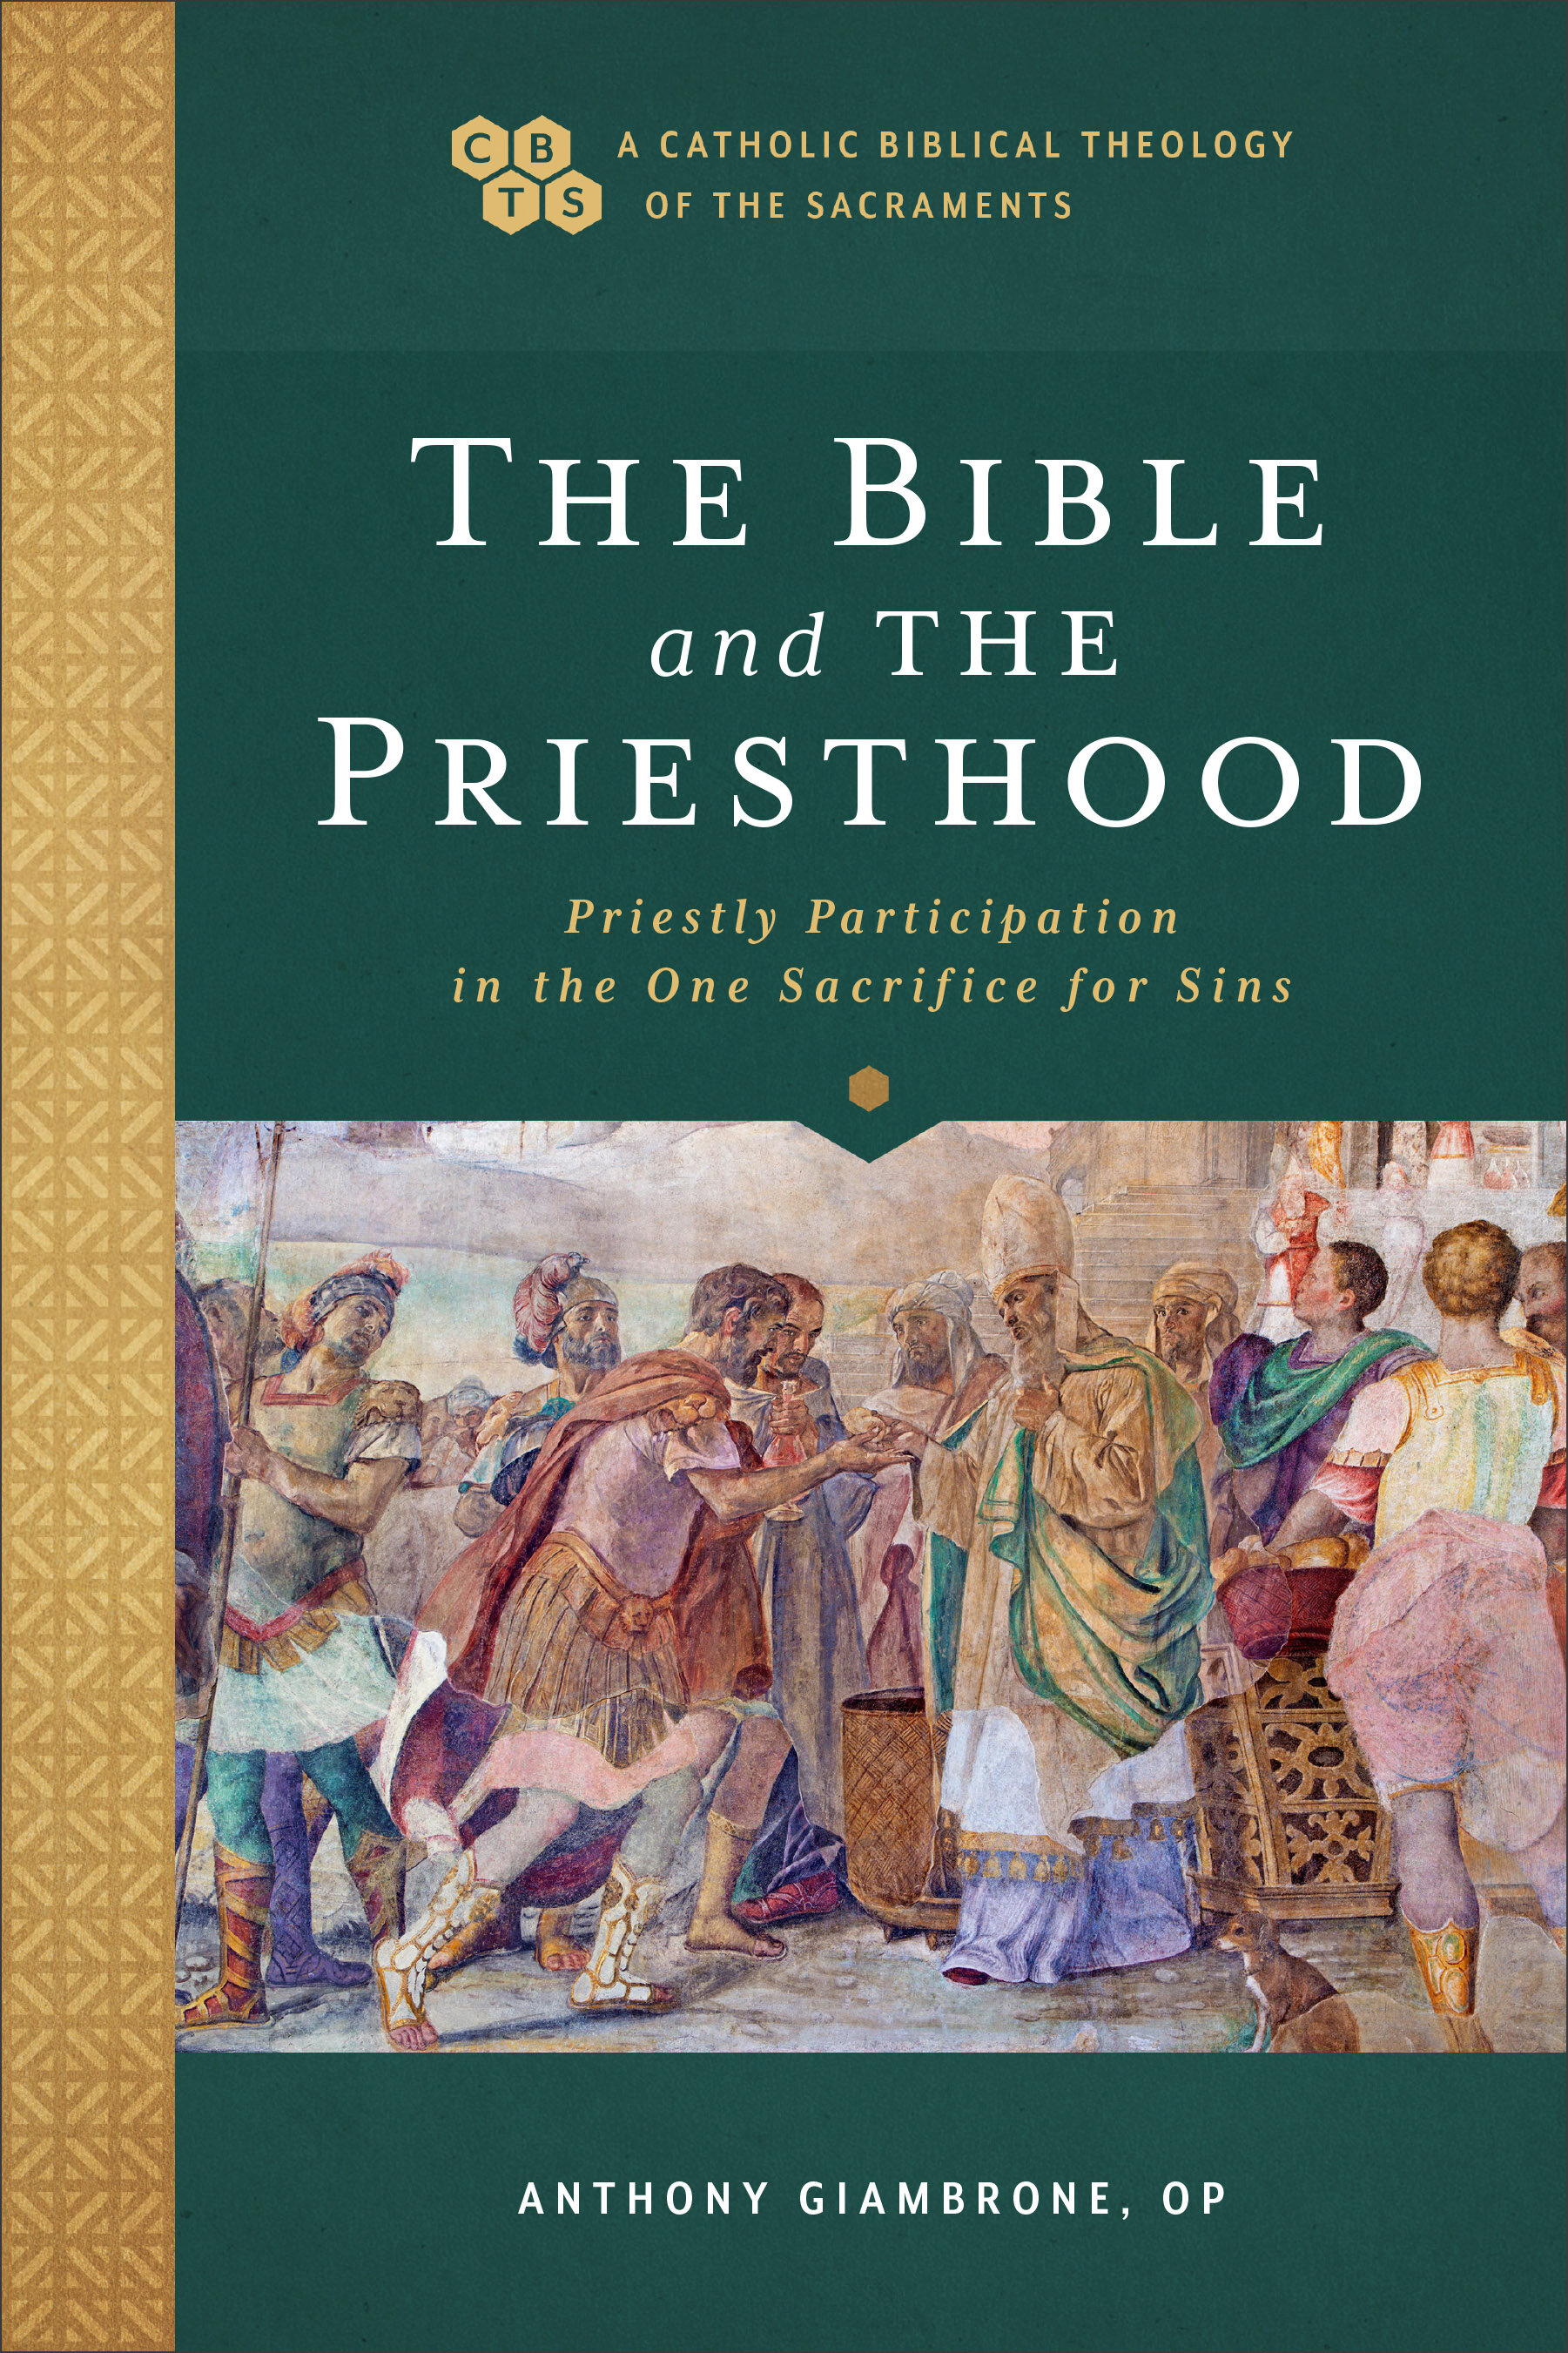 The Bible and the Priesthood: Priestly Participation in the One Sacrifice for Sins (A Catholic Biblical Theology of the Sacraments)